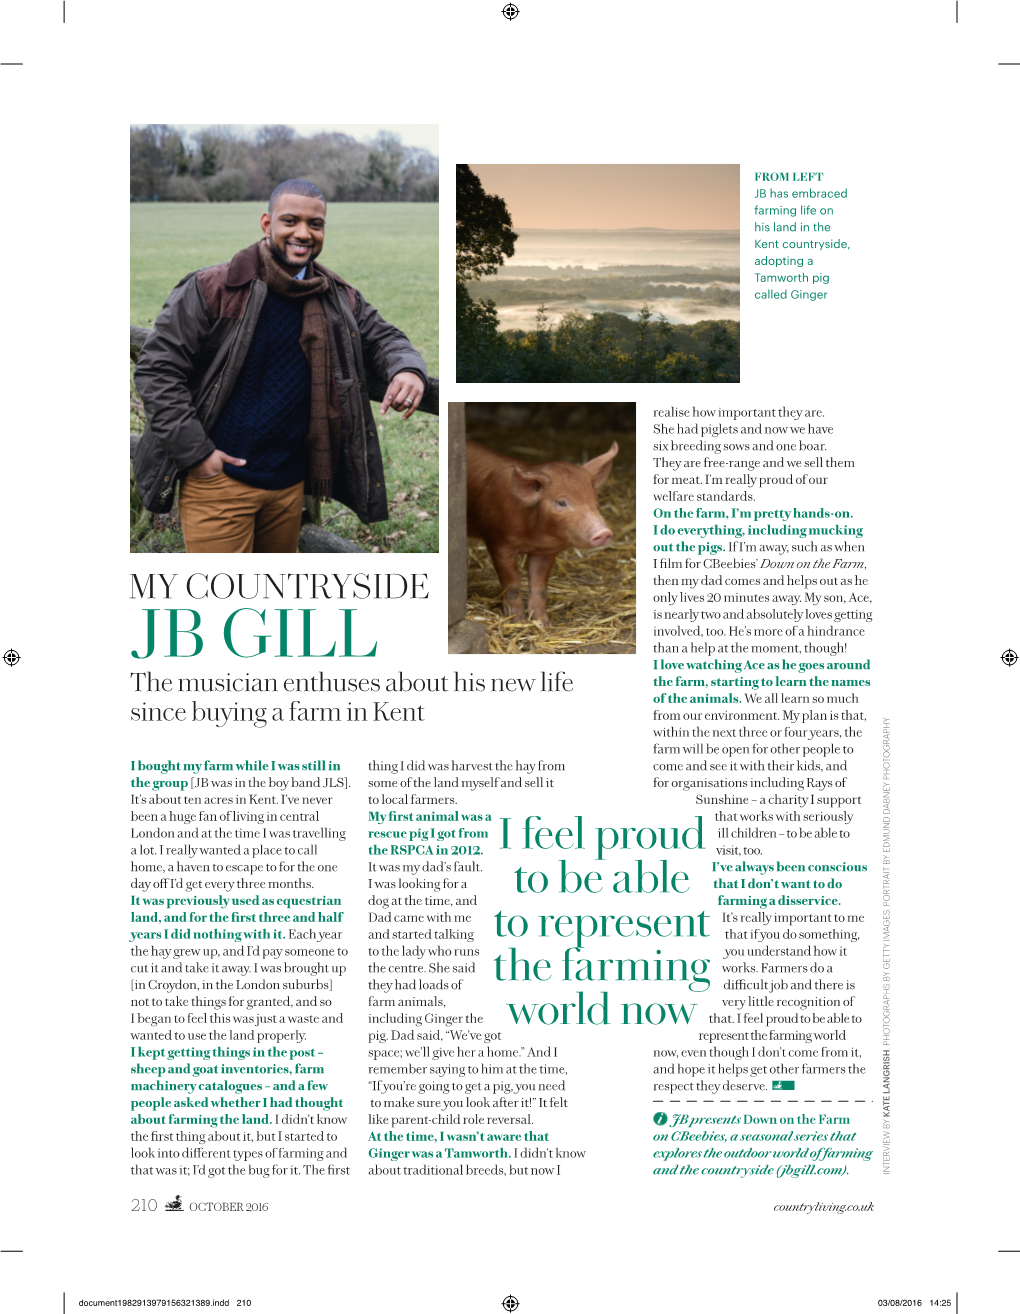 JB GILL I Love Watching Ace As He Goes Around the Musician Enthuses About His New Life the Farm, Starting to Learn the Names of the Animals